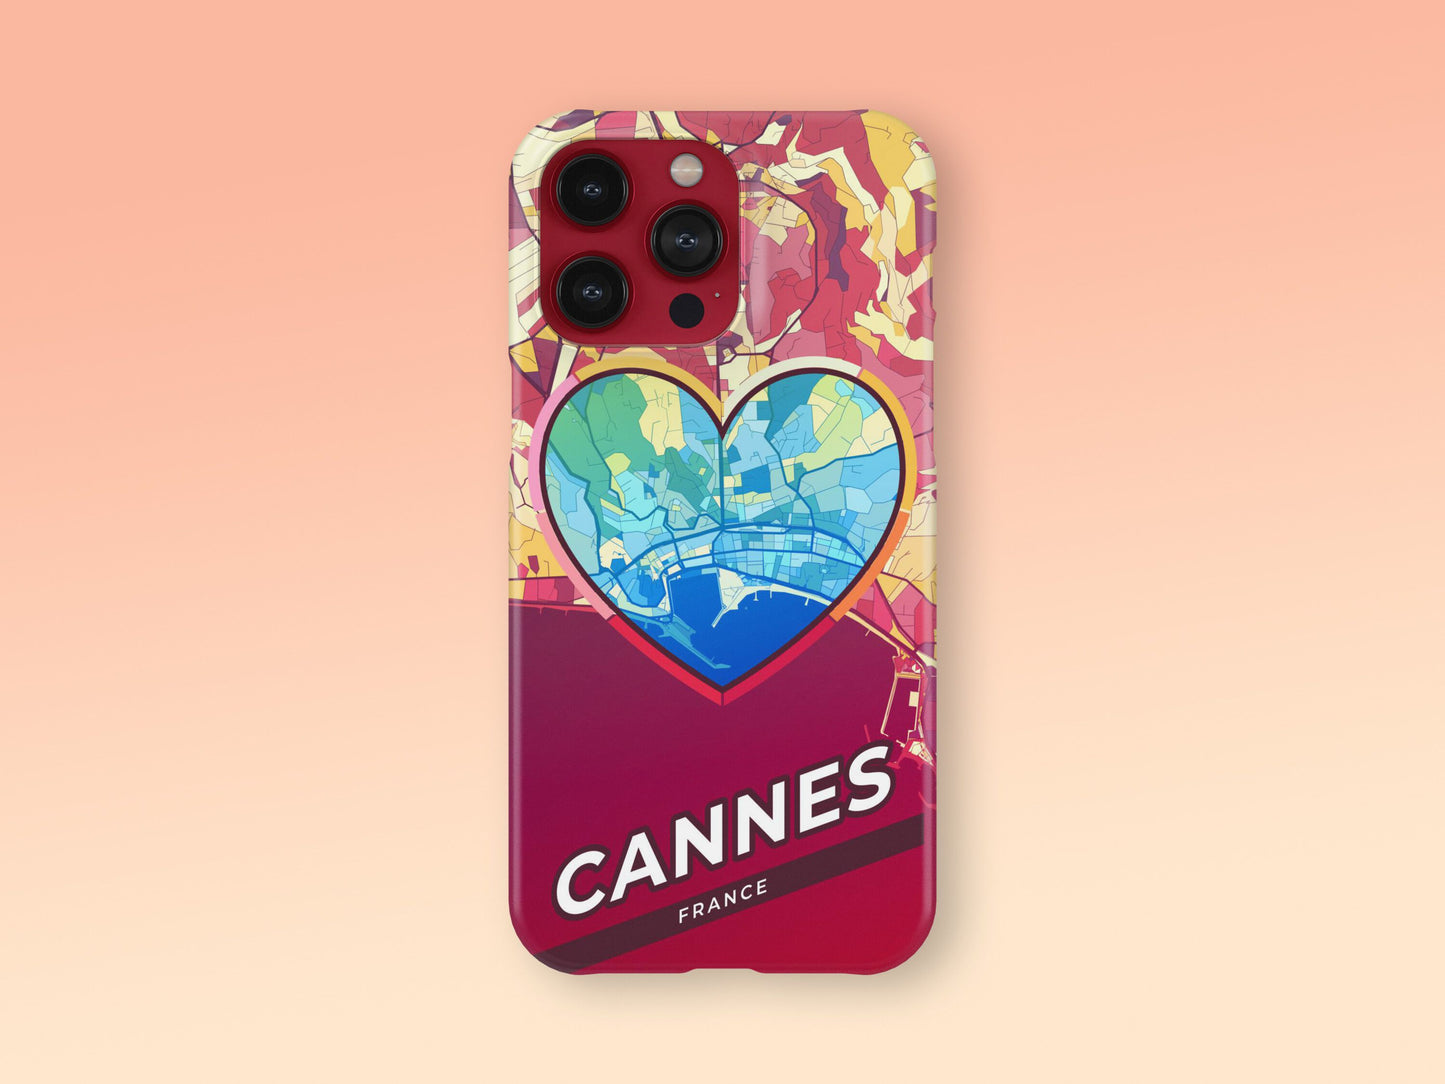 Cannes France slim phone case with colorful icon. Birthday, wedding or housewarming gift. Couple match cases. 2